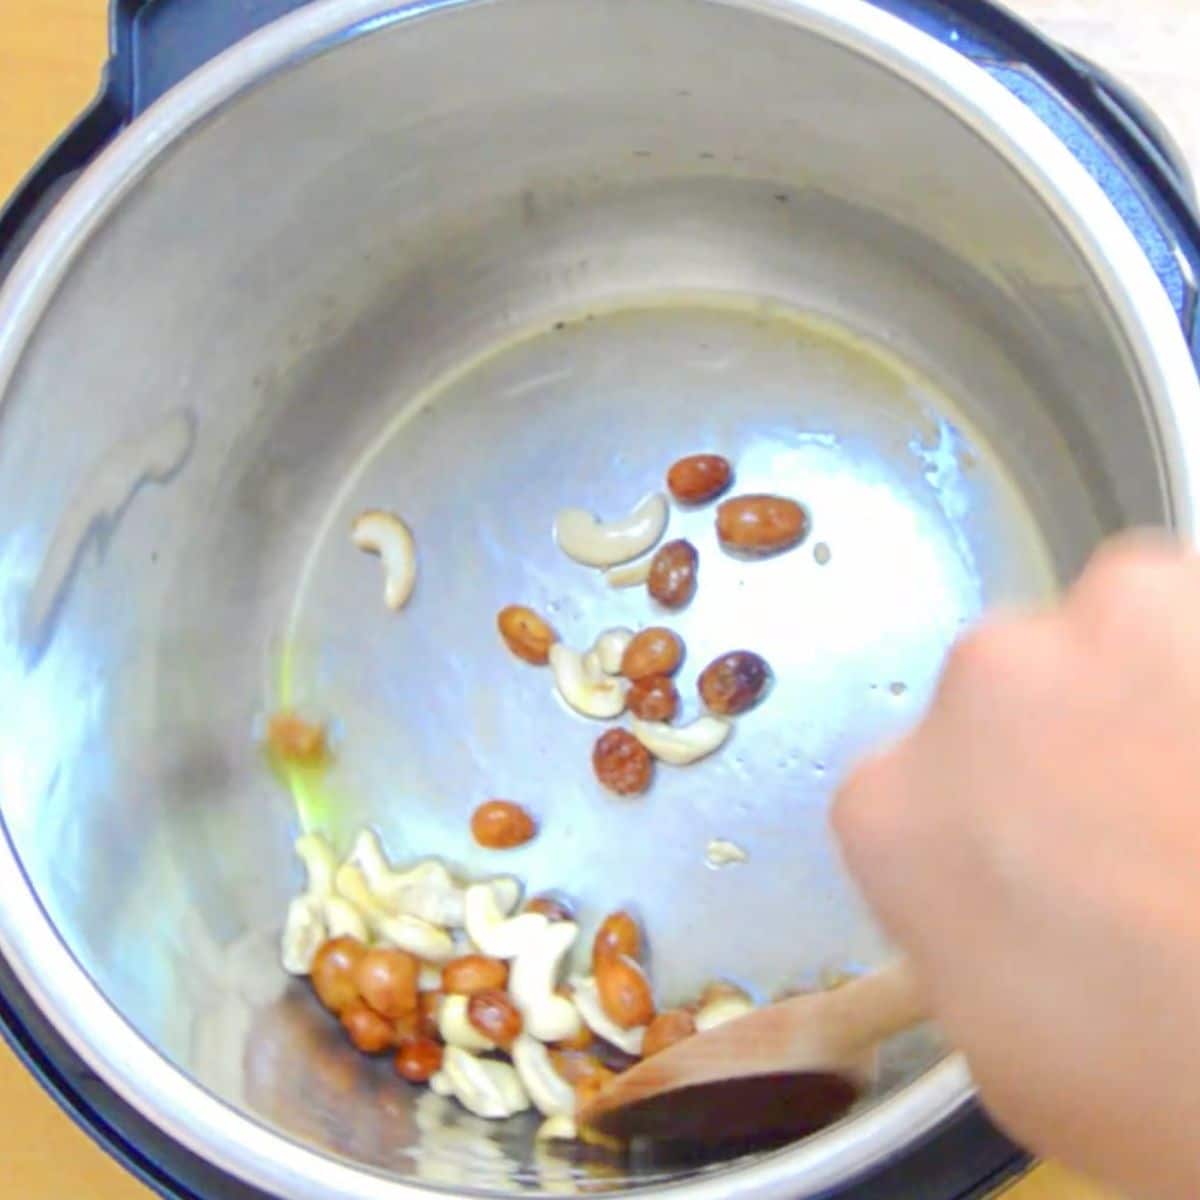 frying raisins and cashew nuts with a wooden spoon in the steel pot.